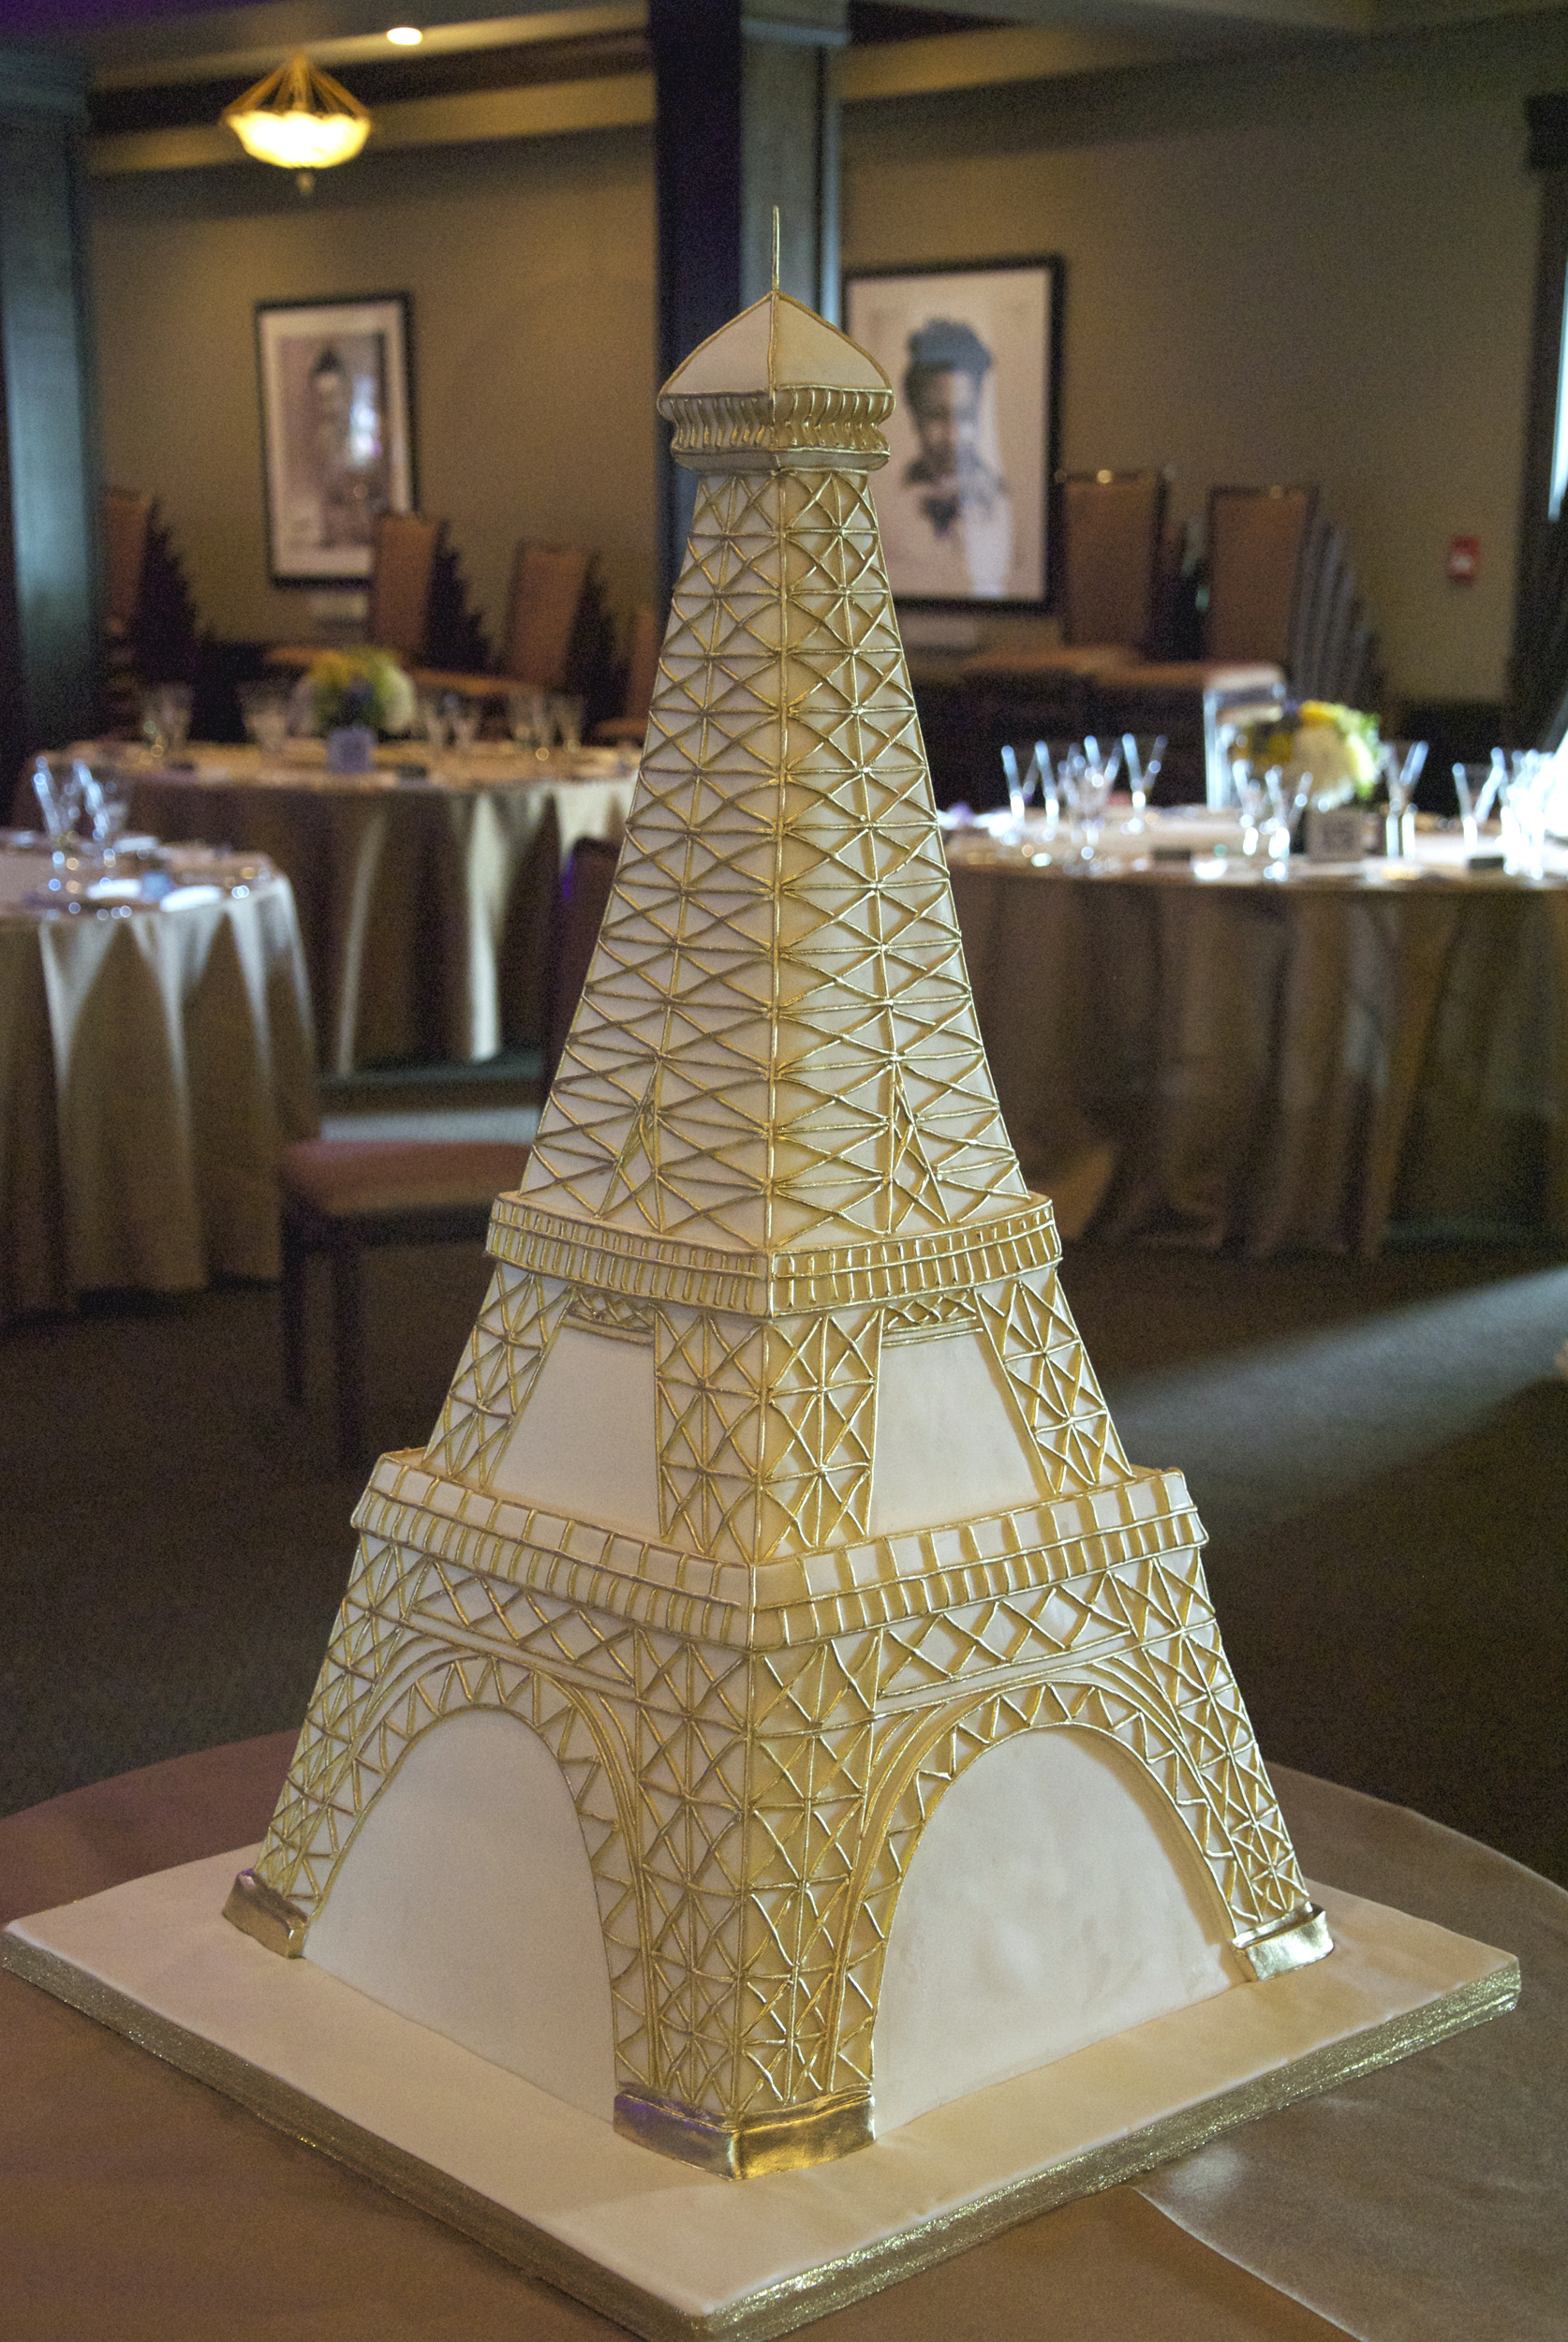 tower cake eiffel cakes paris birthday theme toronto tour themed towers eifel decoration biscuit biscuits amazing effel buildings read eyeful